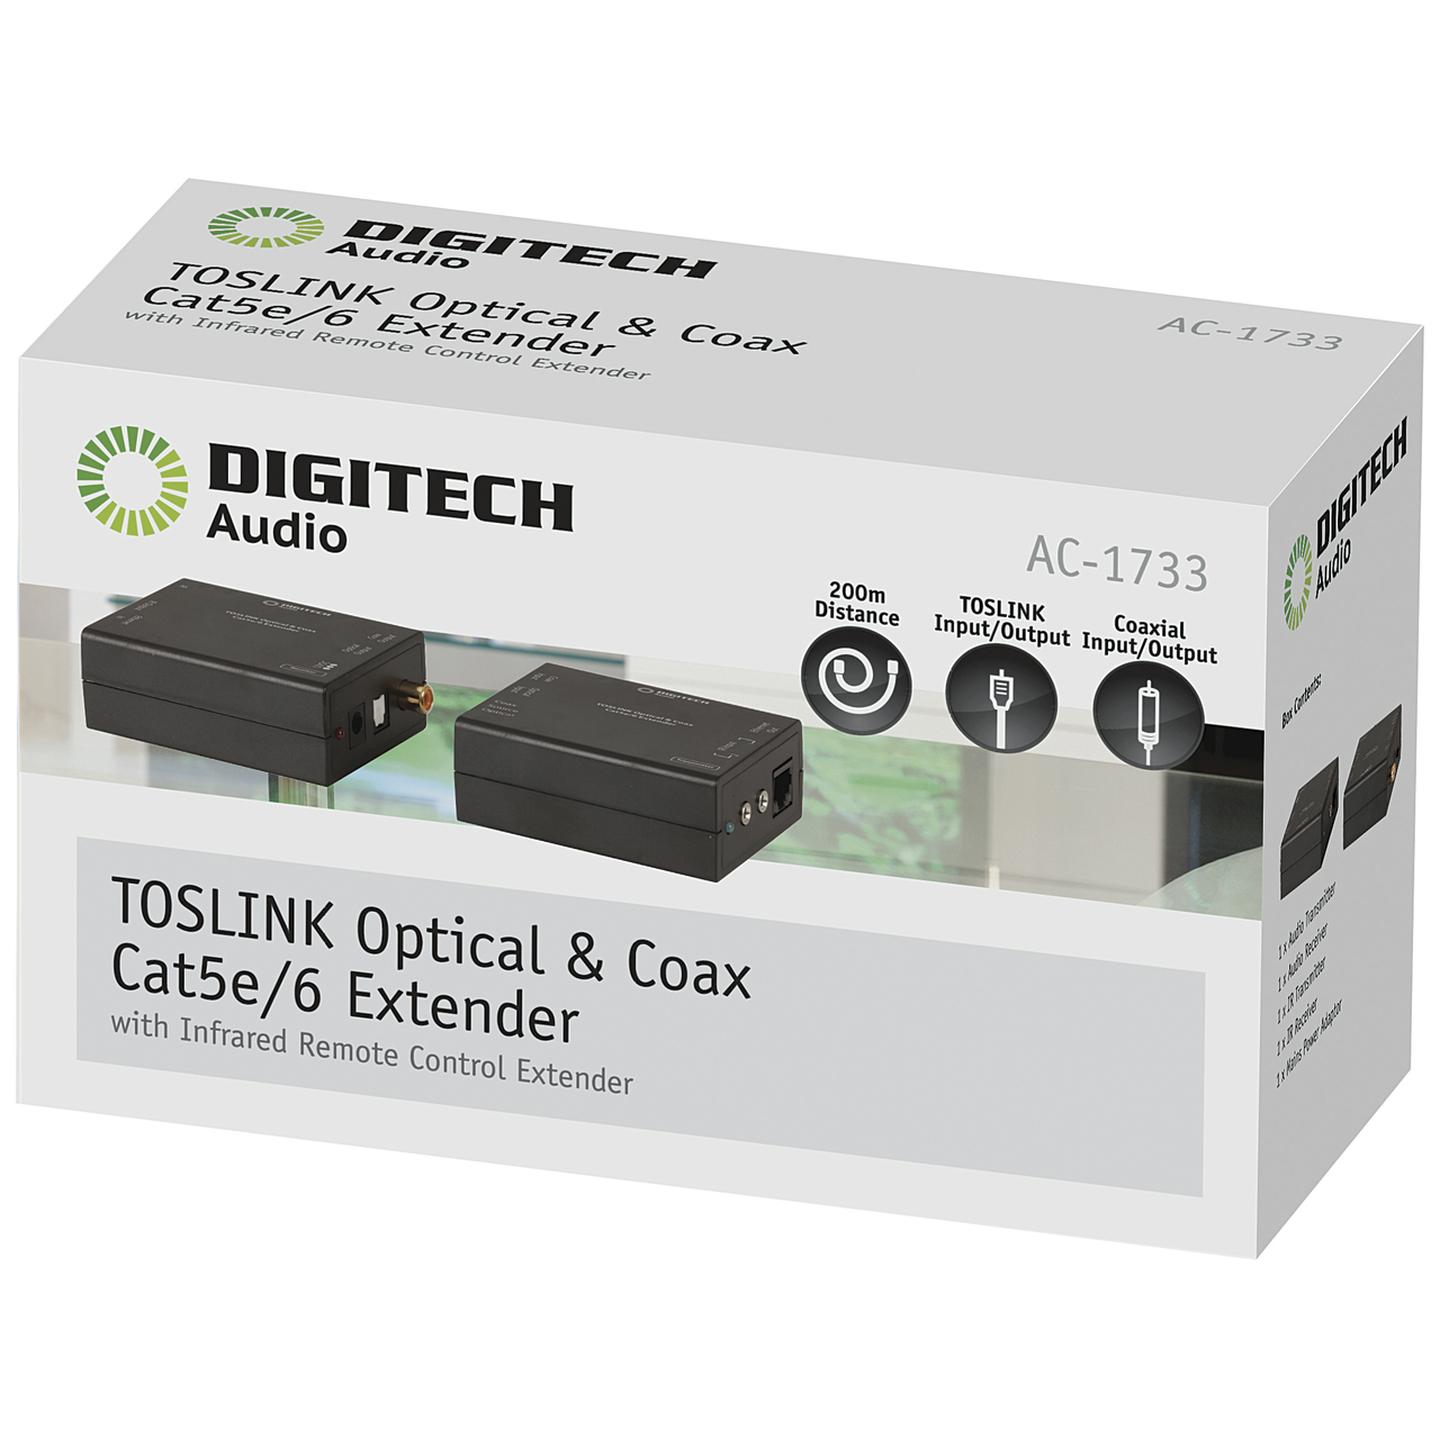 TOSLINK & Coax Audio Cat5e/6 Extender with Infrared